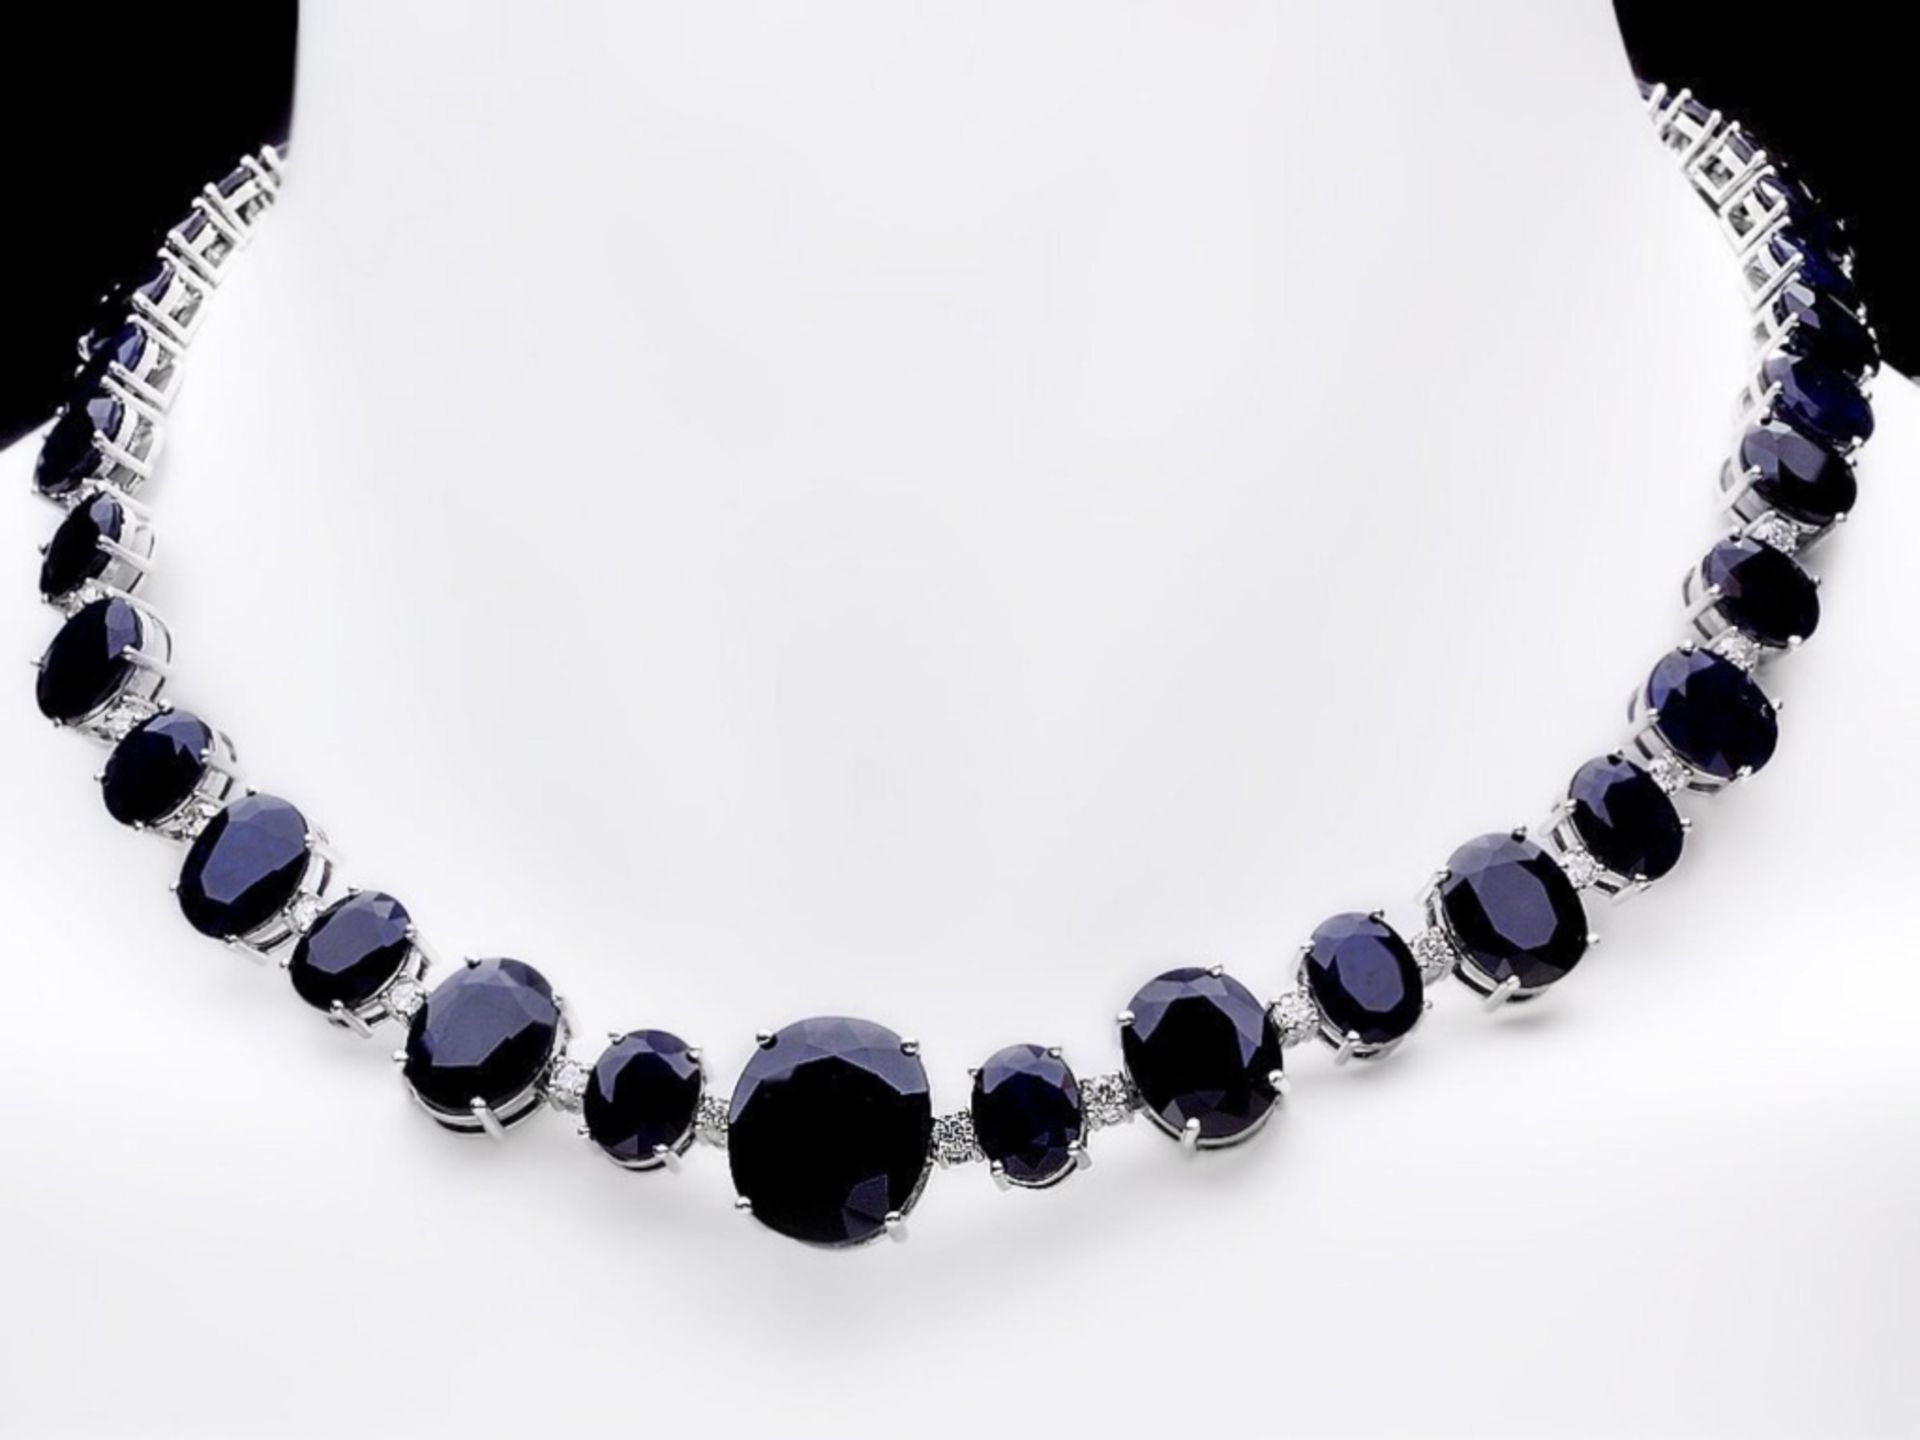 14k Gold 170.00ct Sapphire & 2.00ct Diam Necklace - Image 2 of 5